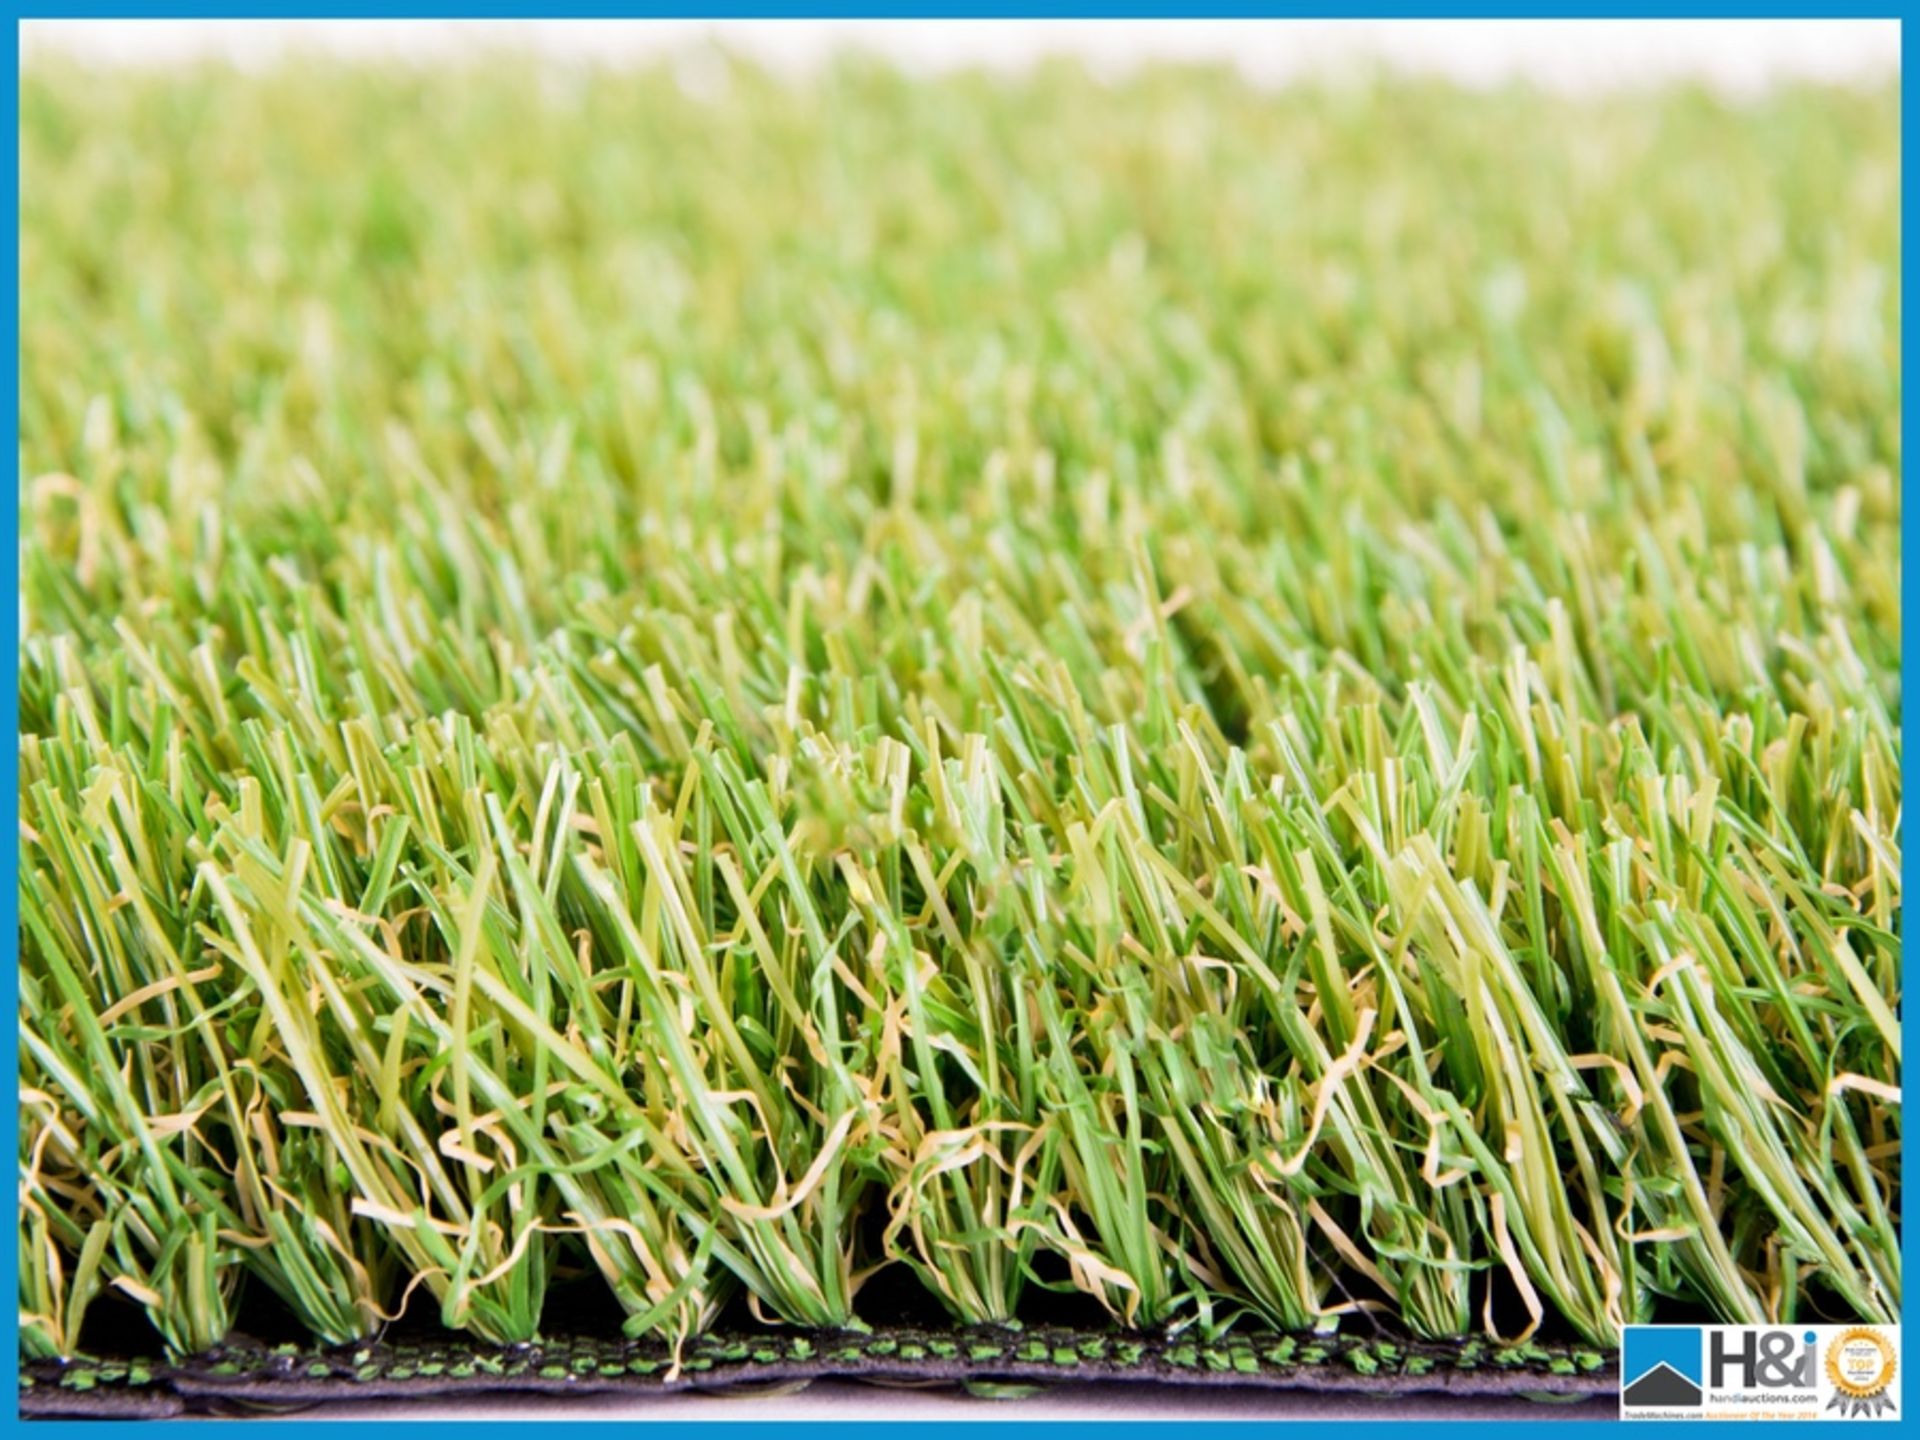 Ultra high-quality 'Woodthorpe' artificial grass. Useage applications, commercial and domestic, - Bild 2 aus 4